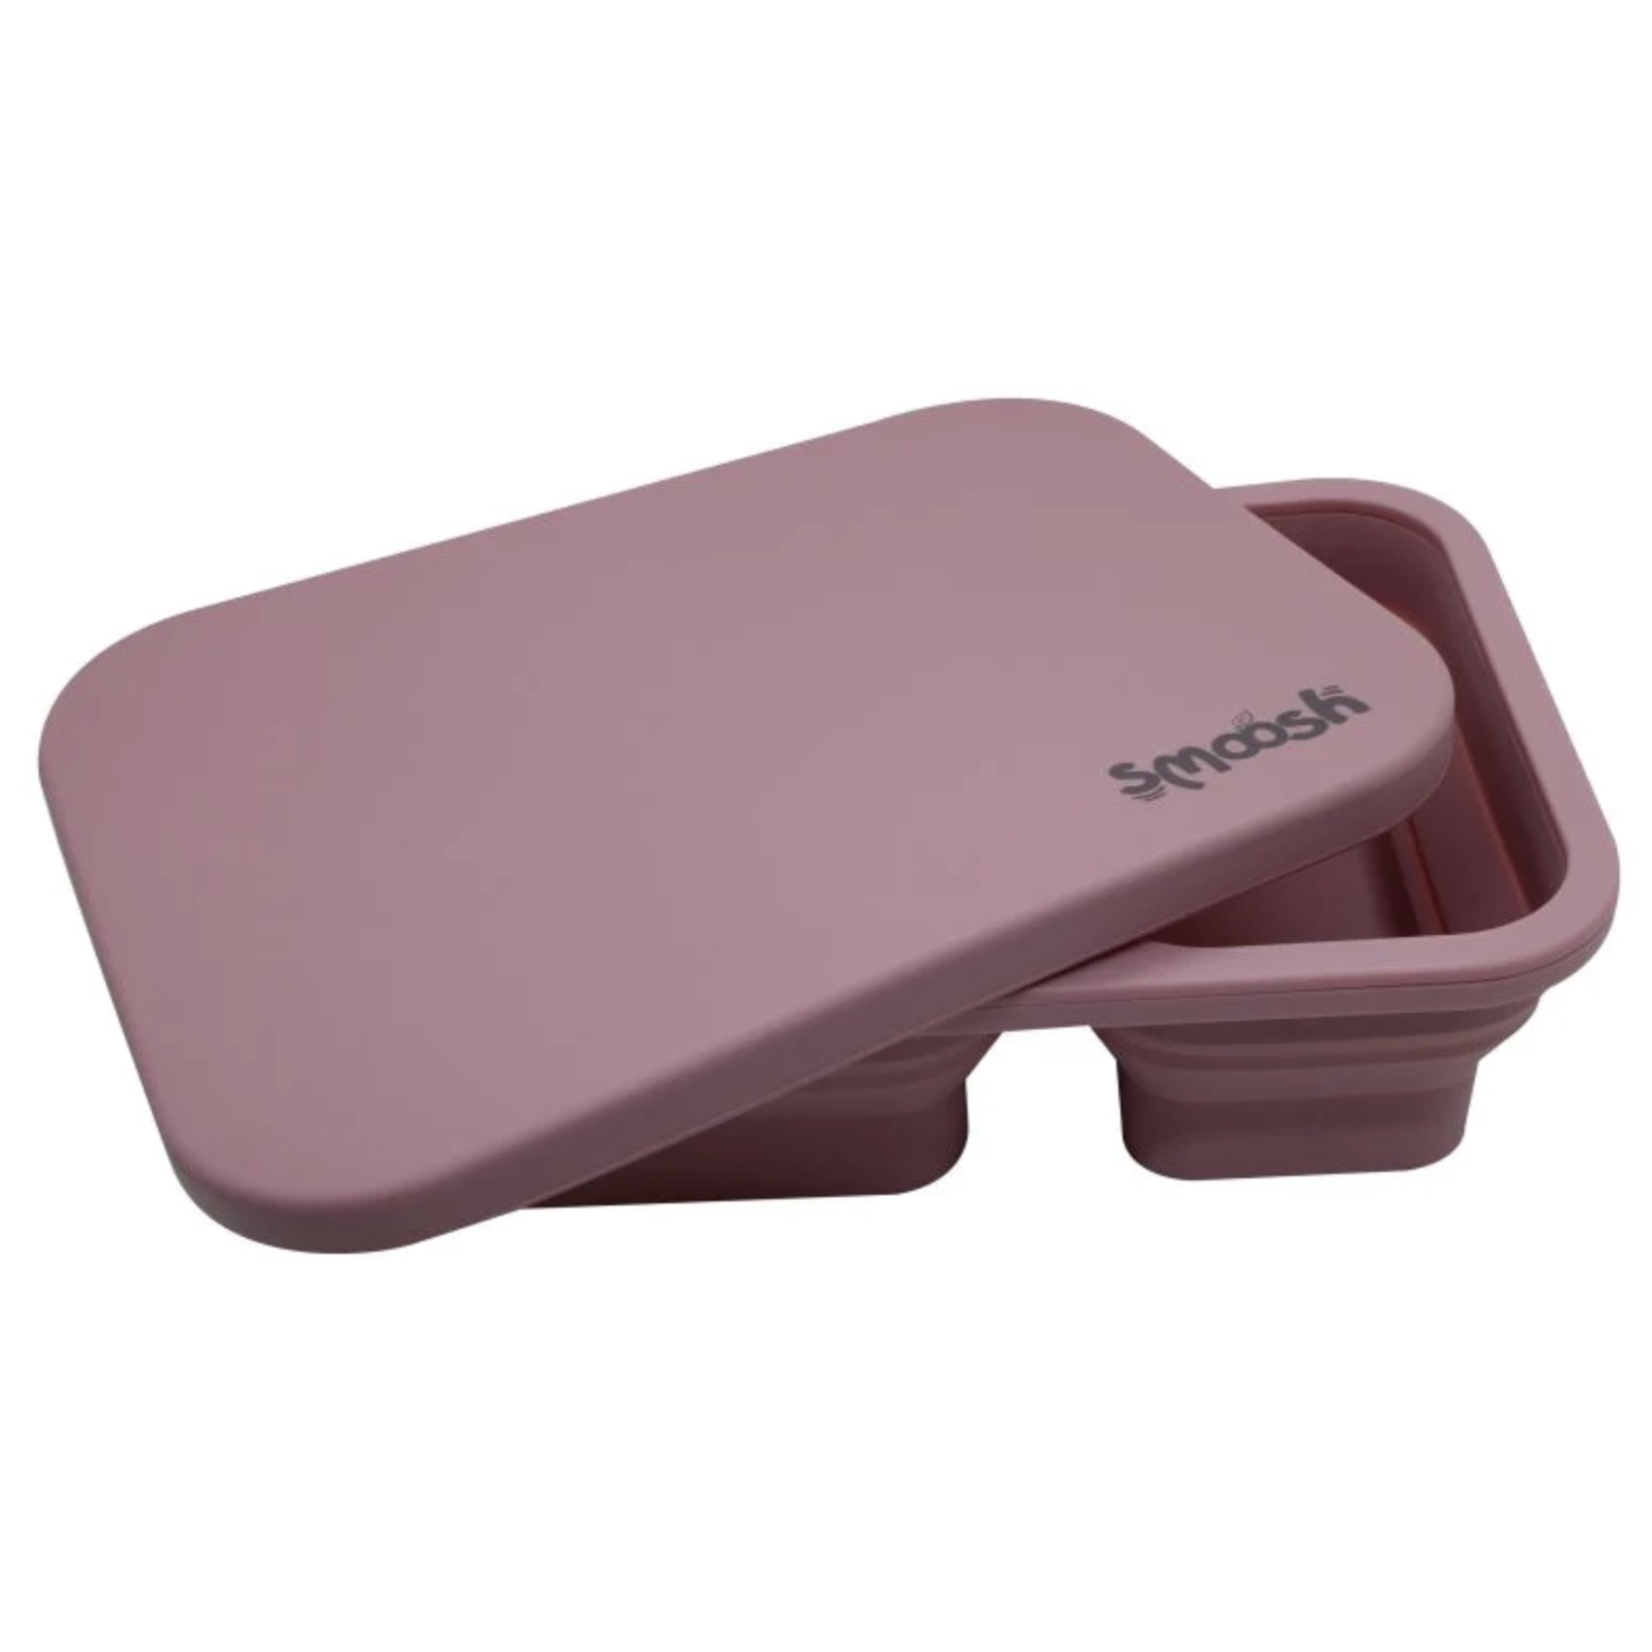 Brands4kids Smoosh Pink Silicone Collapsible Lunch Box Pink